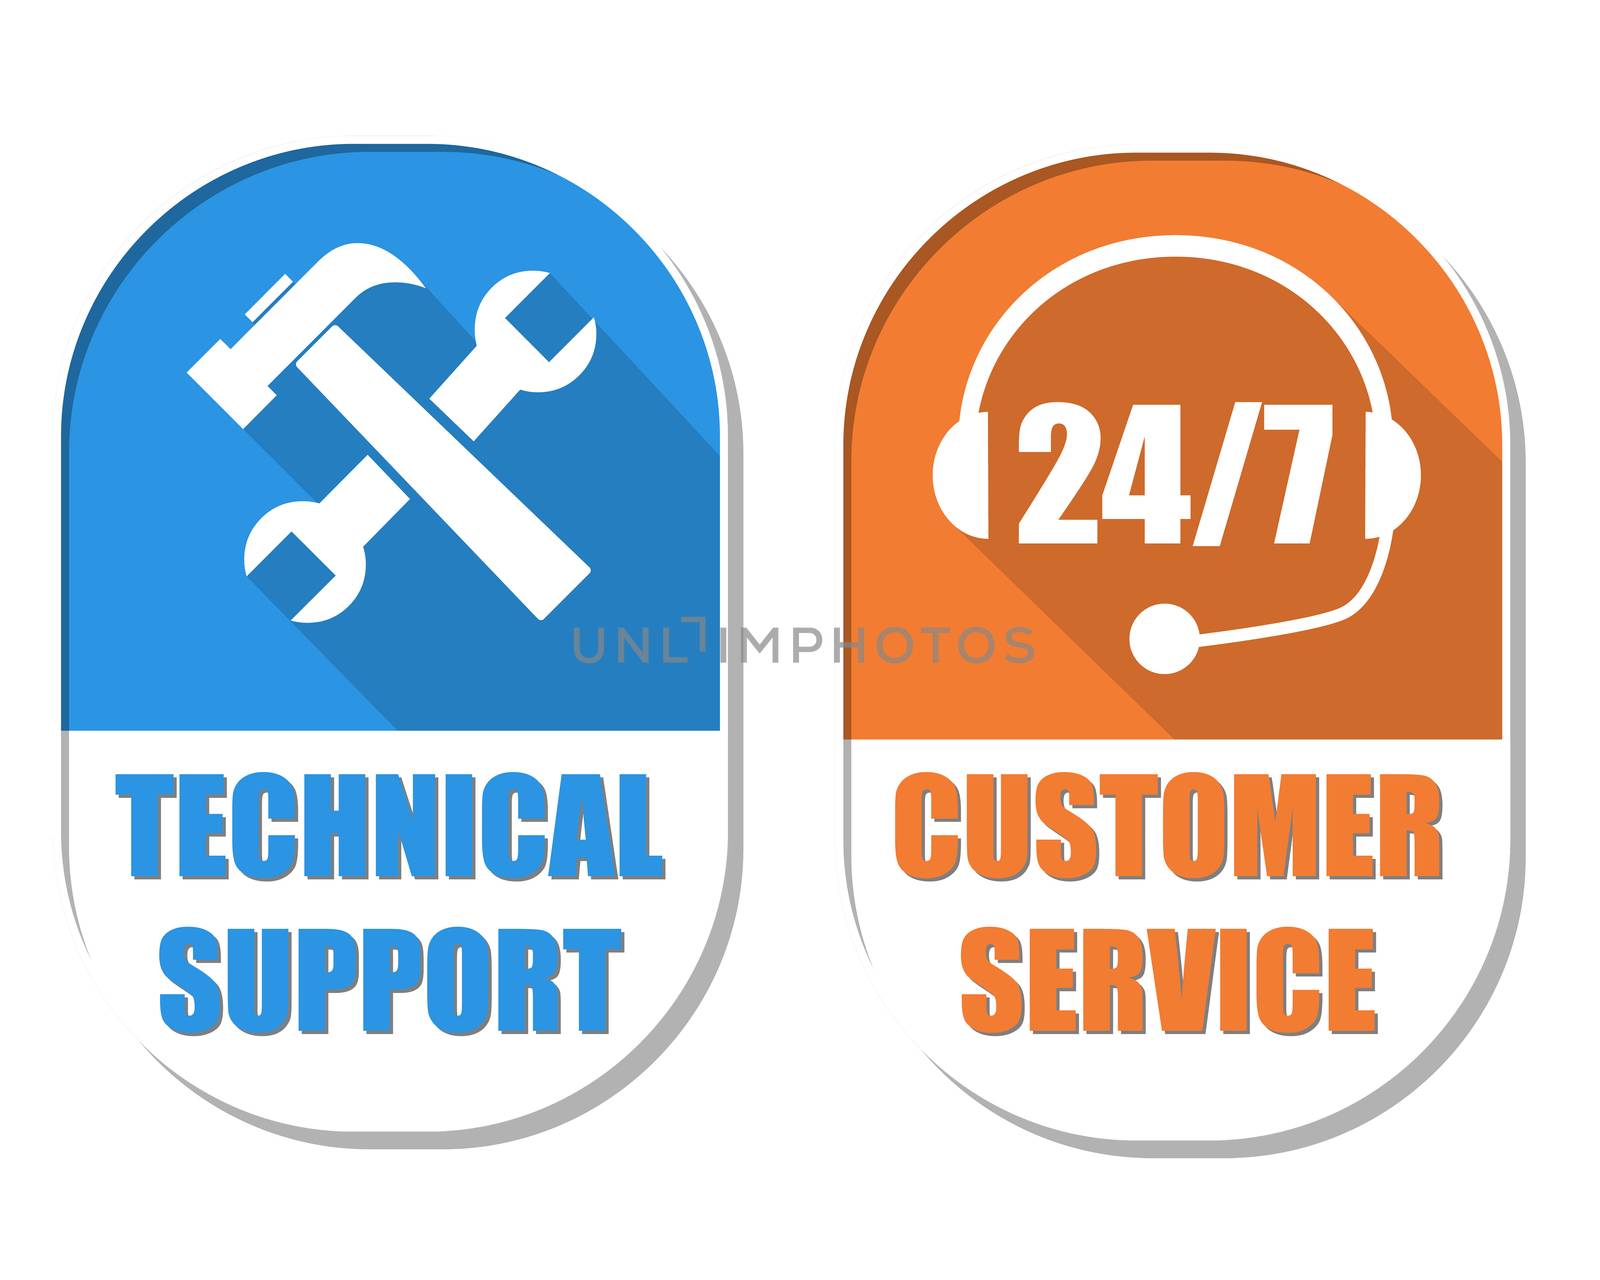 technical support with tools sign and 24/7 customer service with headset symbol, two elliptic flat design labels with icons, business attendance concept